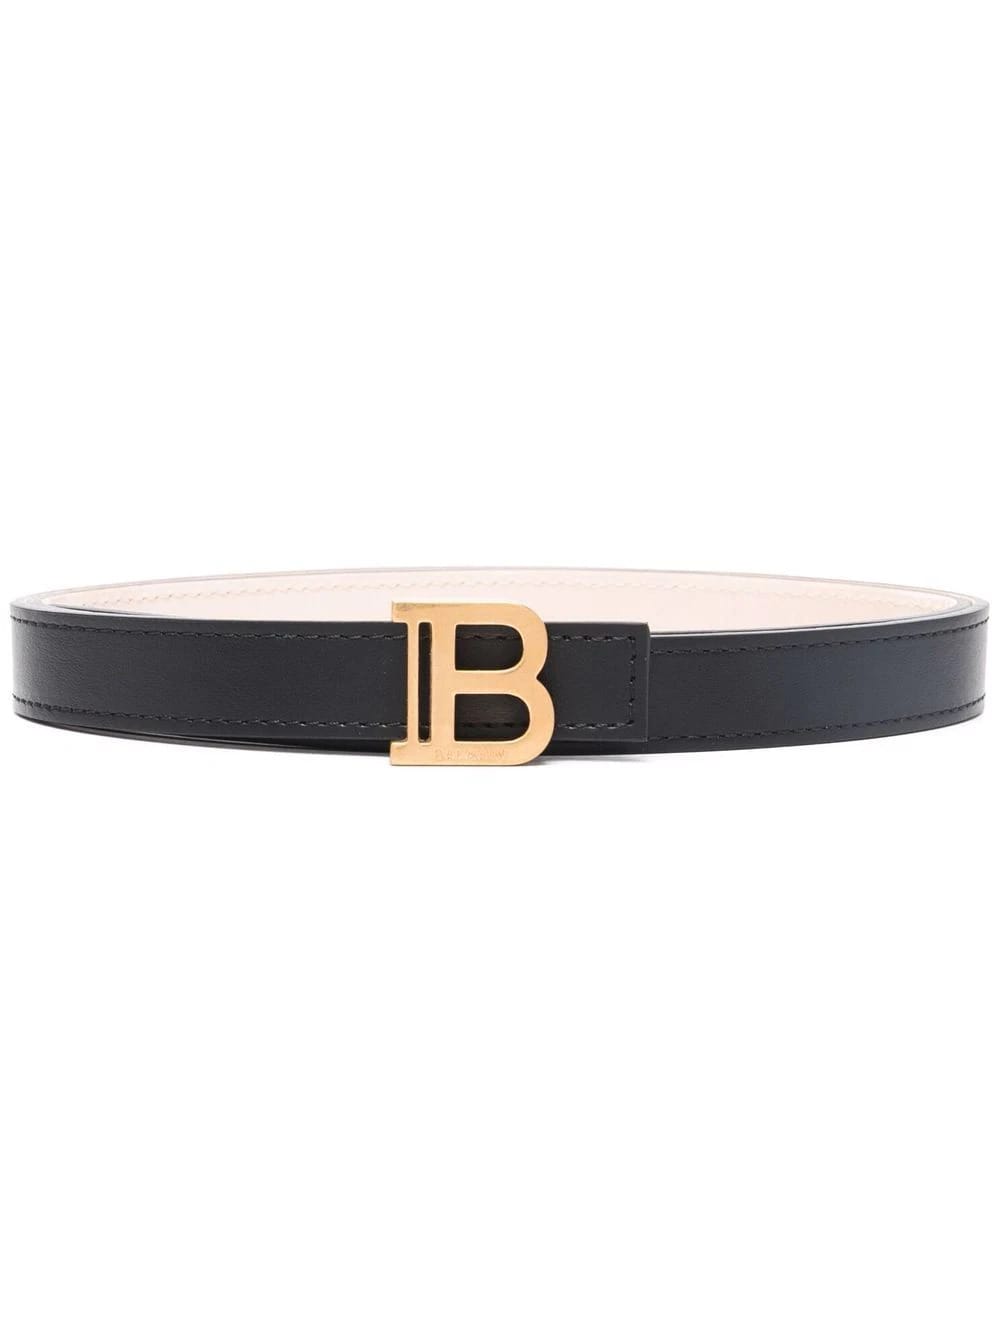 Balmain Woman Black And Gold b Belt In Smooth Leather 2cm